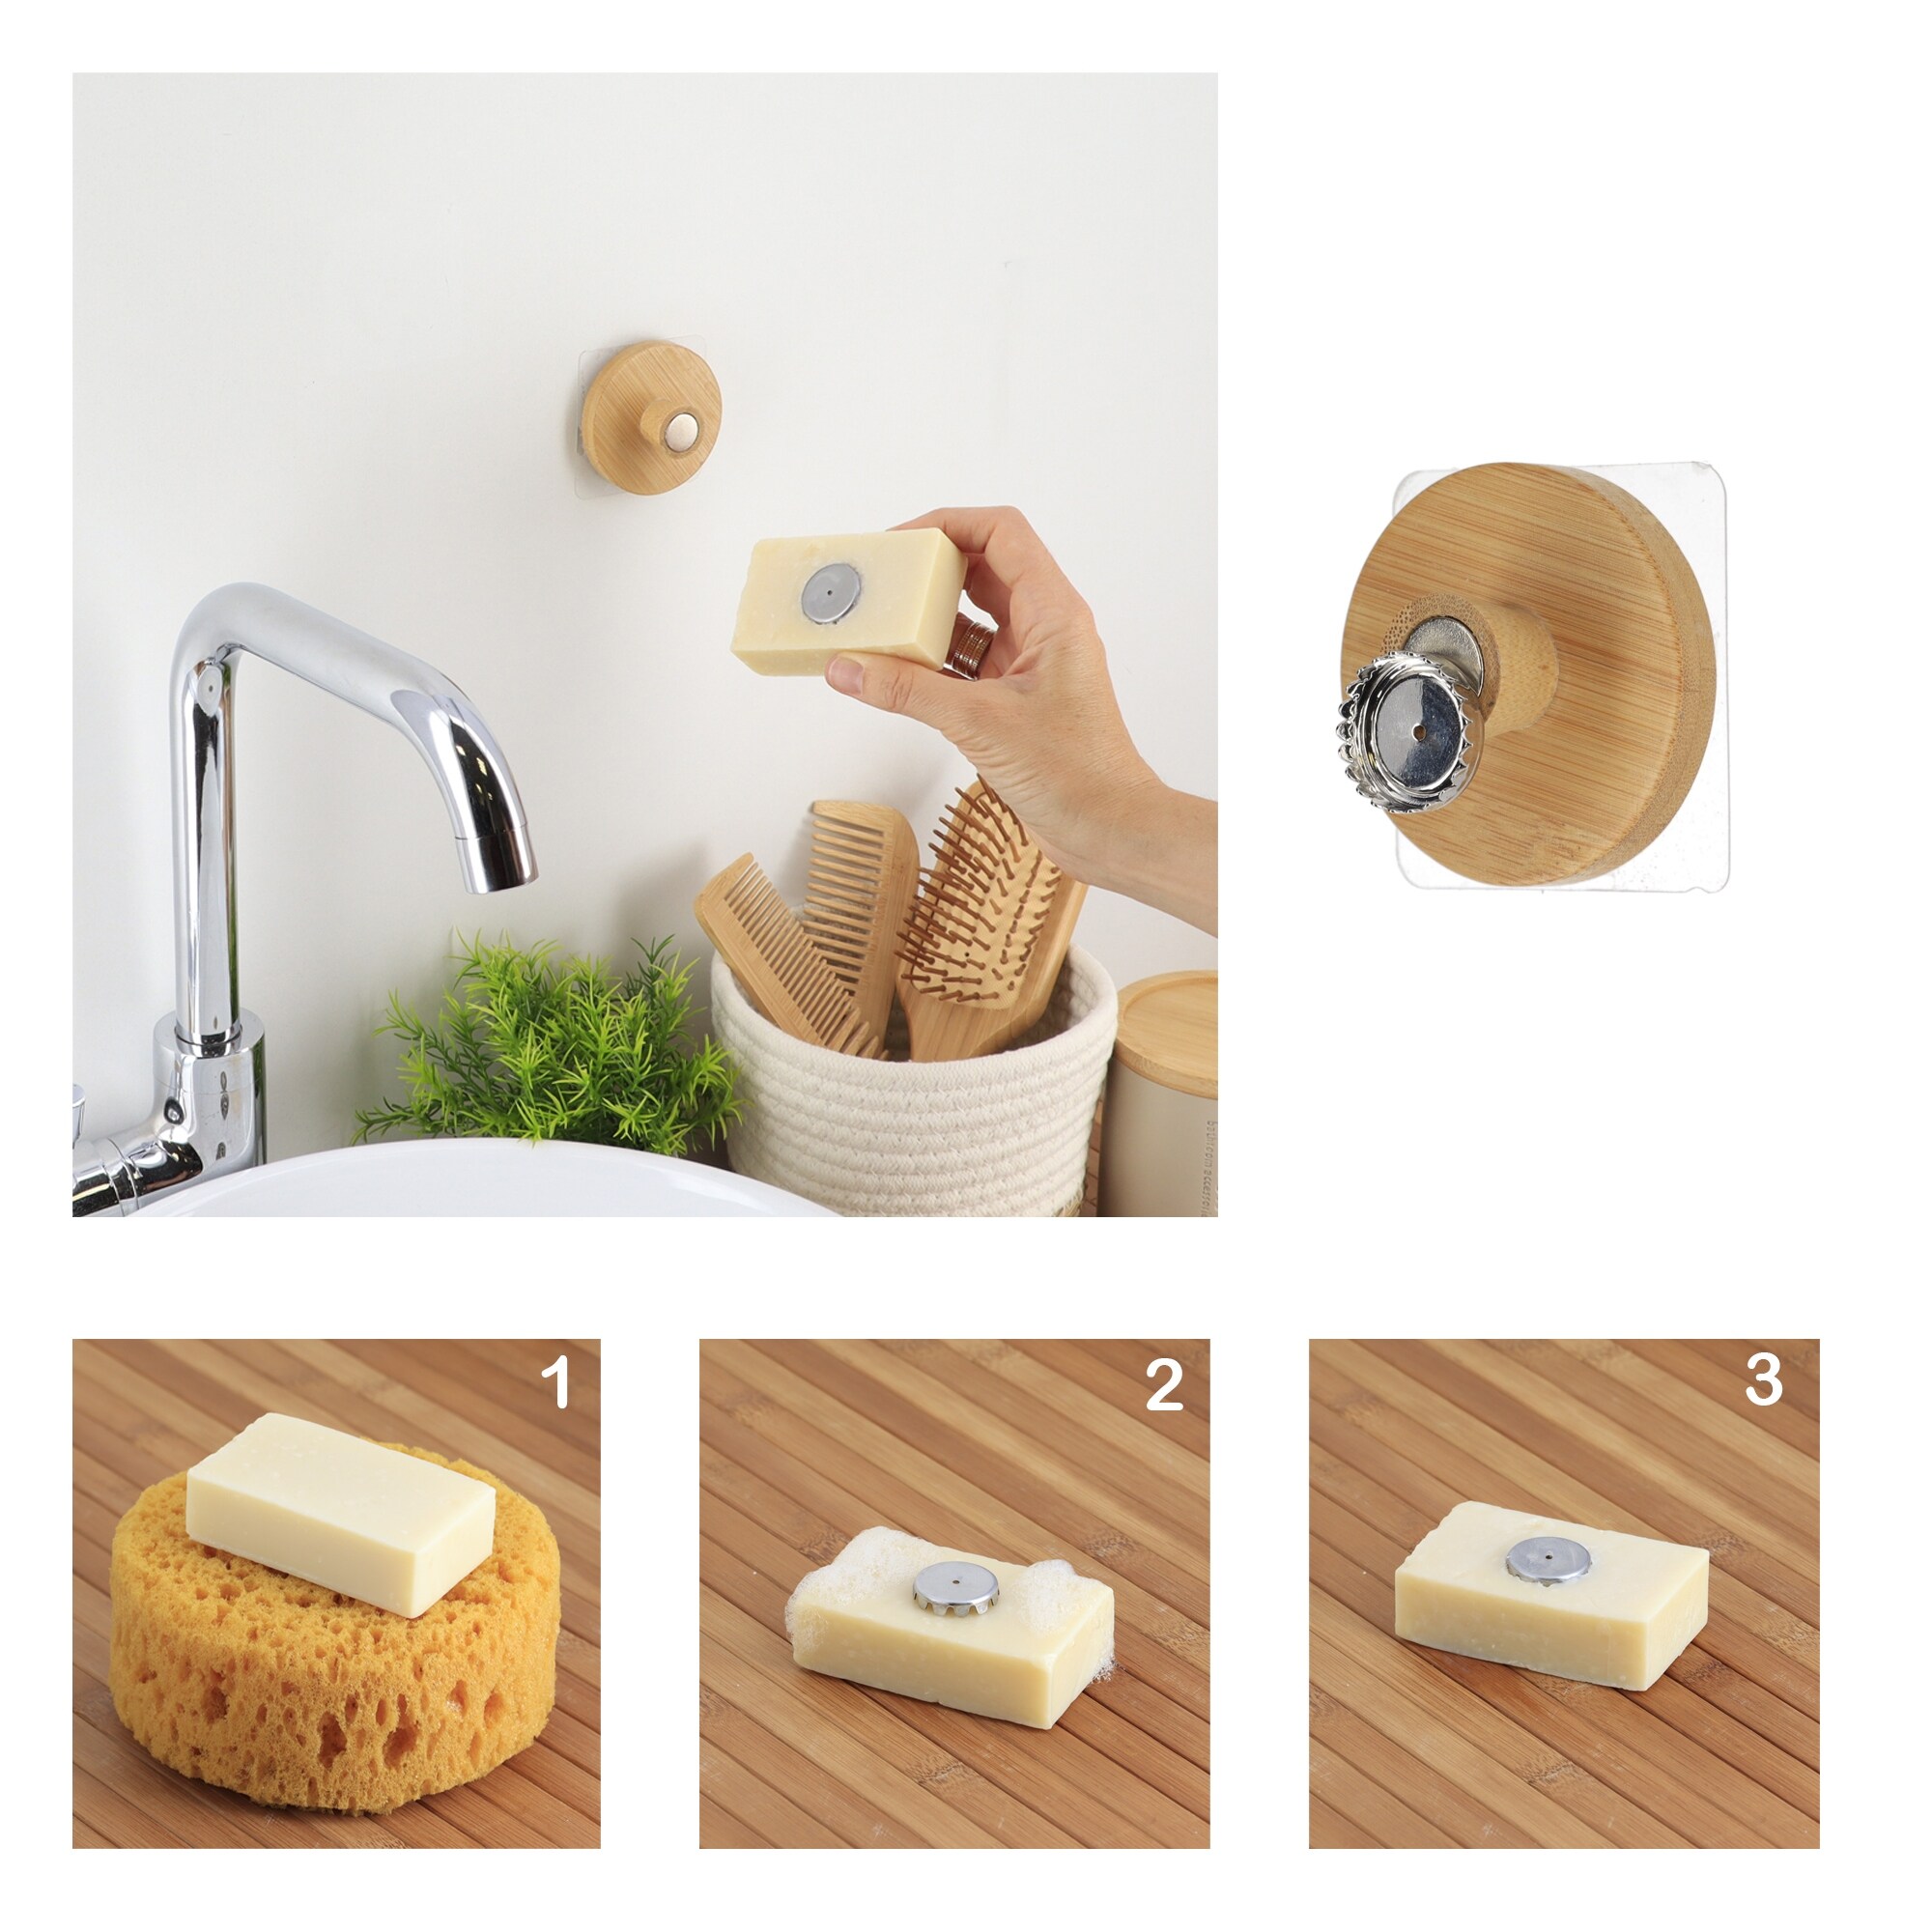 https://ak1.ostkcdn.com/images/products/is/images/direct/a44a84d280cc2a03380e9f75c9caf800f6a16f8e/Magnetic-Soap-Holder-Bamboo-Wall-Mounted-Adhesive.jpg